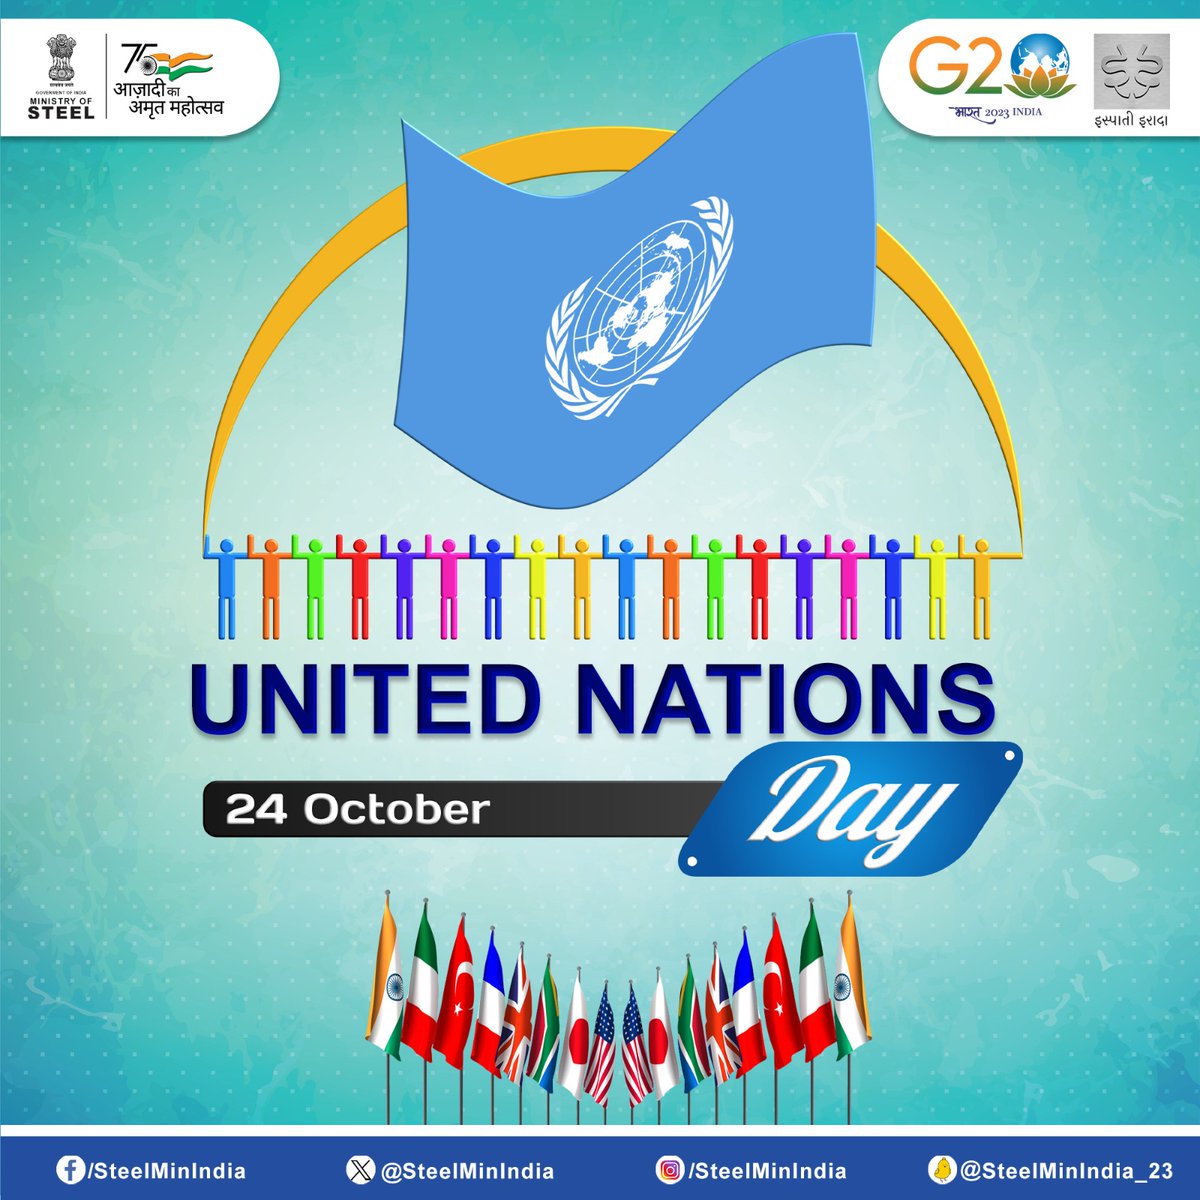 On #UnitedNationsDay we celebrate the collective efforts of nations working together to build a better world. Let's continue striving for peace, equality, and a brighter future for all.☮️🕊️

#UNDay #GlobalUnity